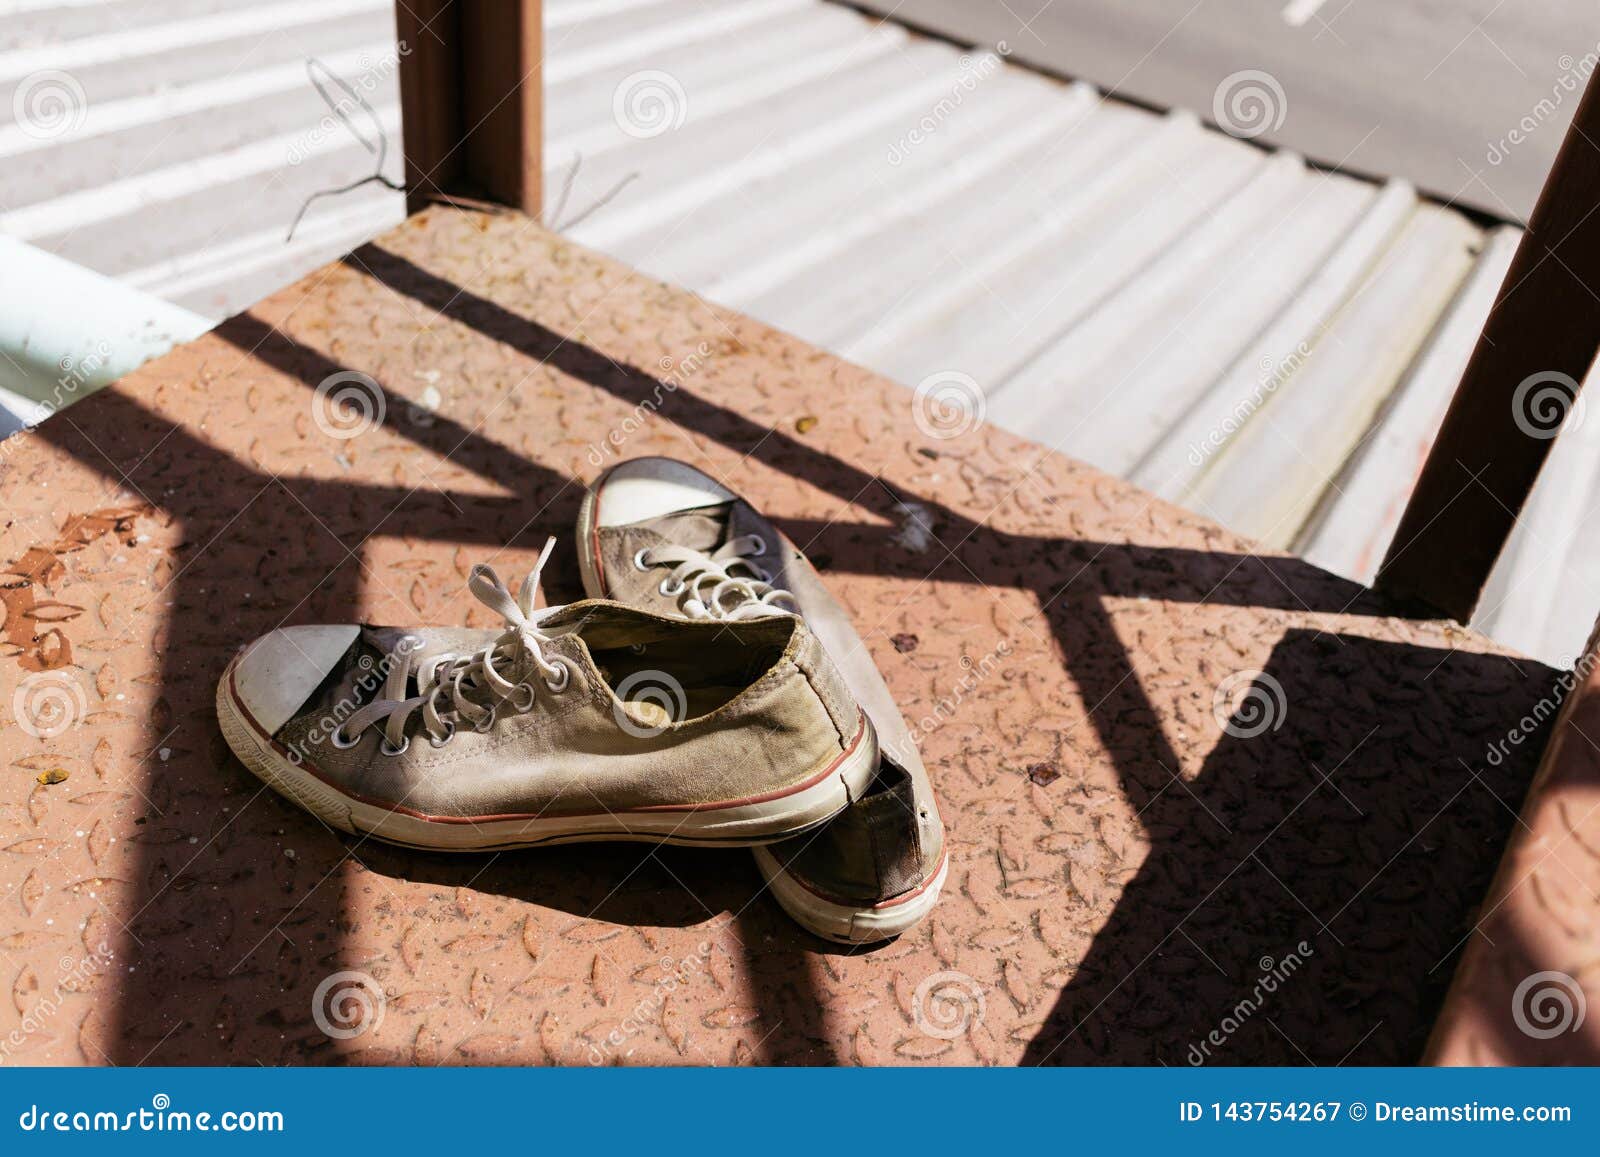 The Sneakers Shoes in Sunshine on Rooftop Stock Image - Image of warm ...